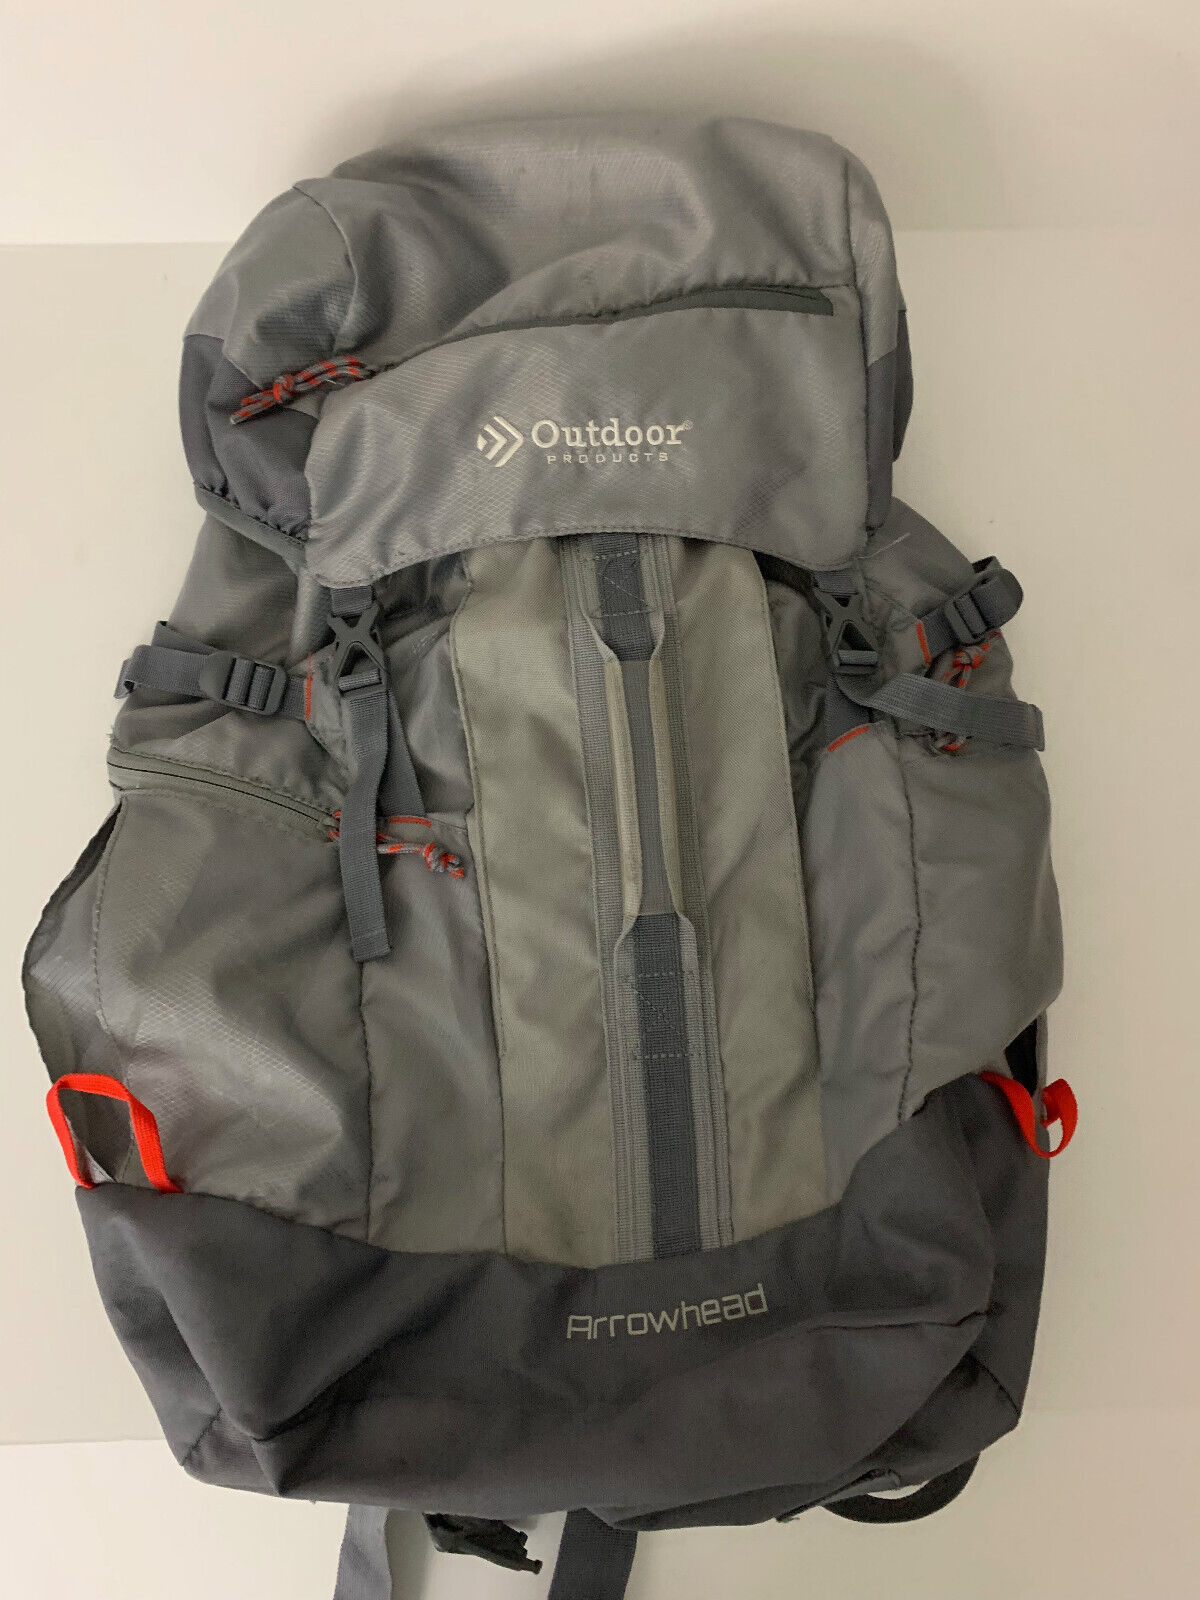 Outdoor Products Arrowhead Hiking Backpack Lightweight Internal Frame